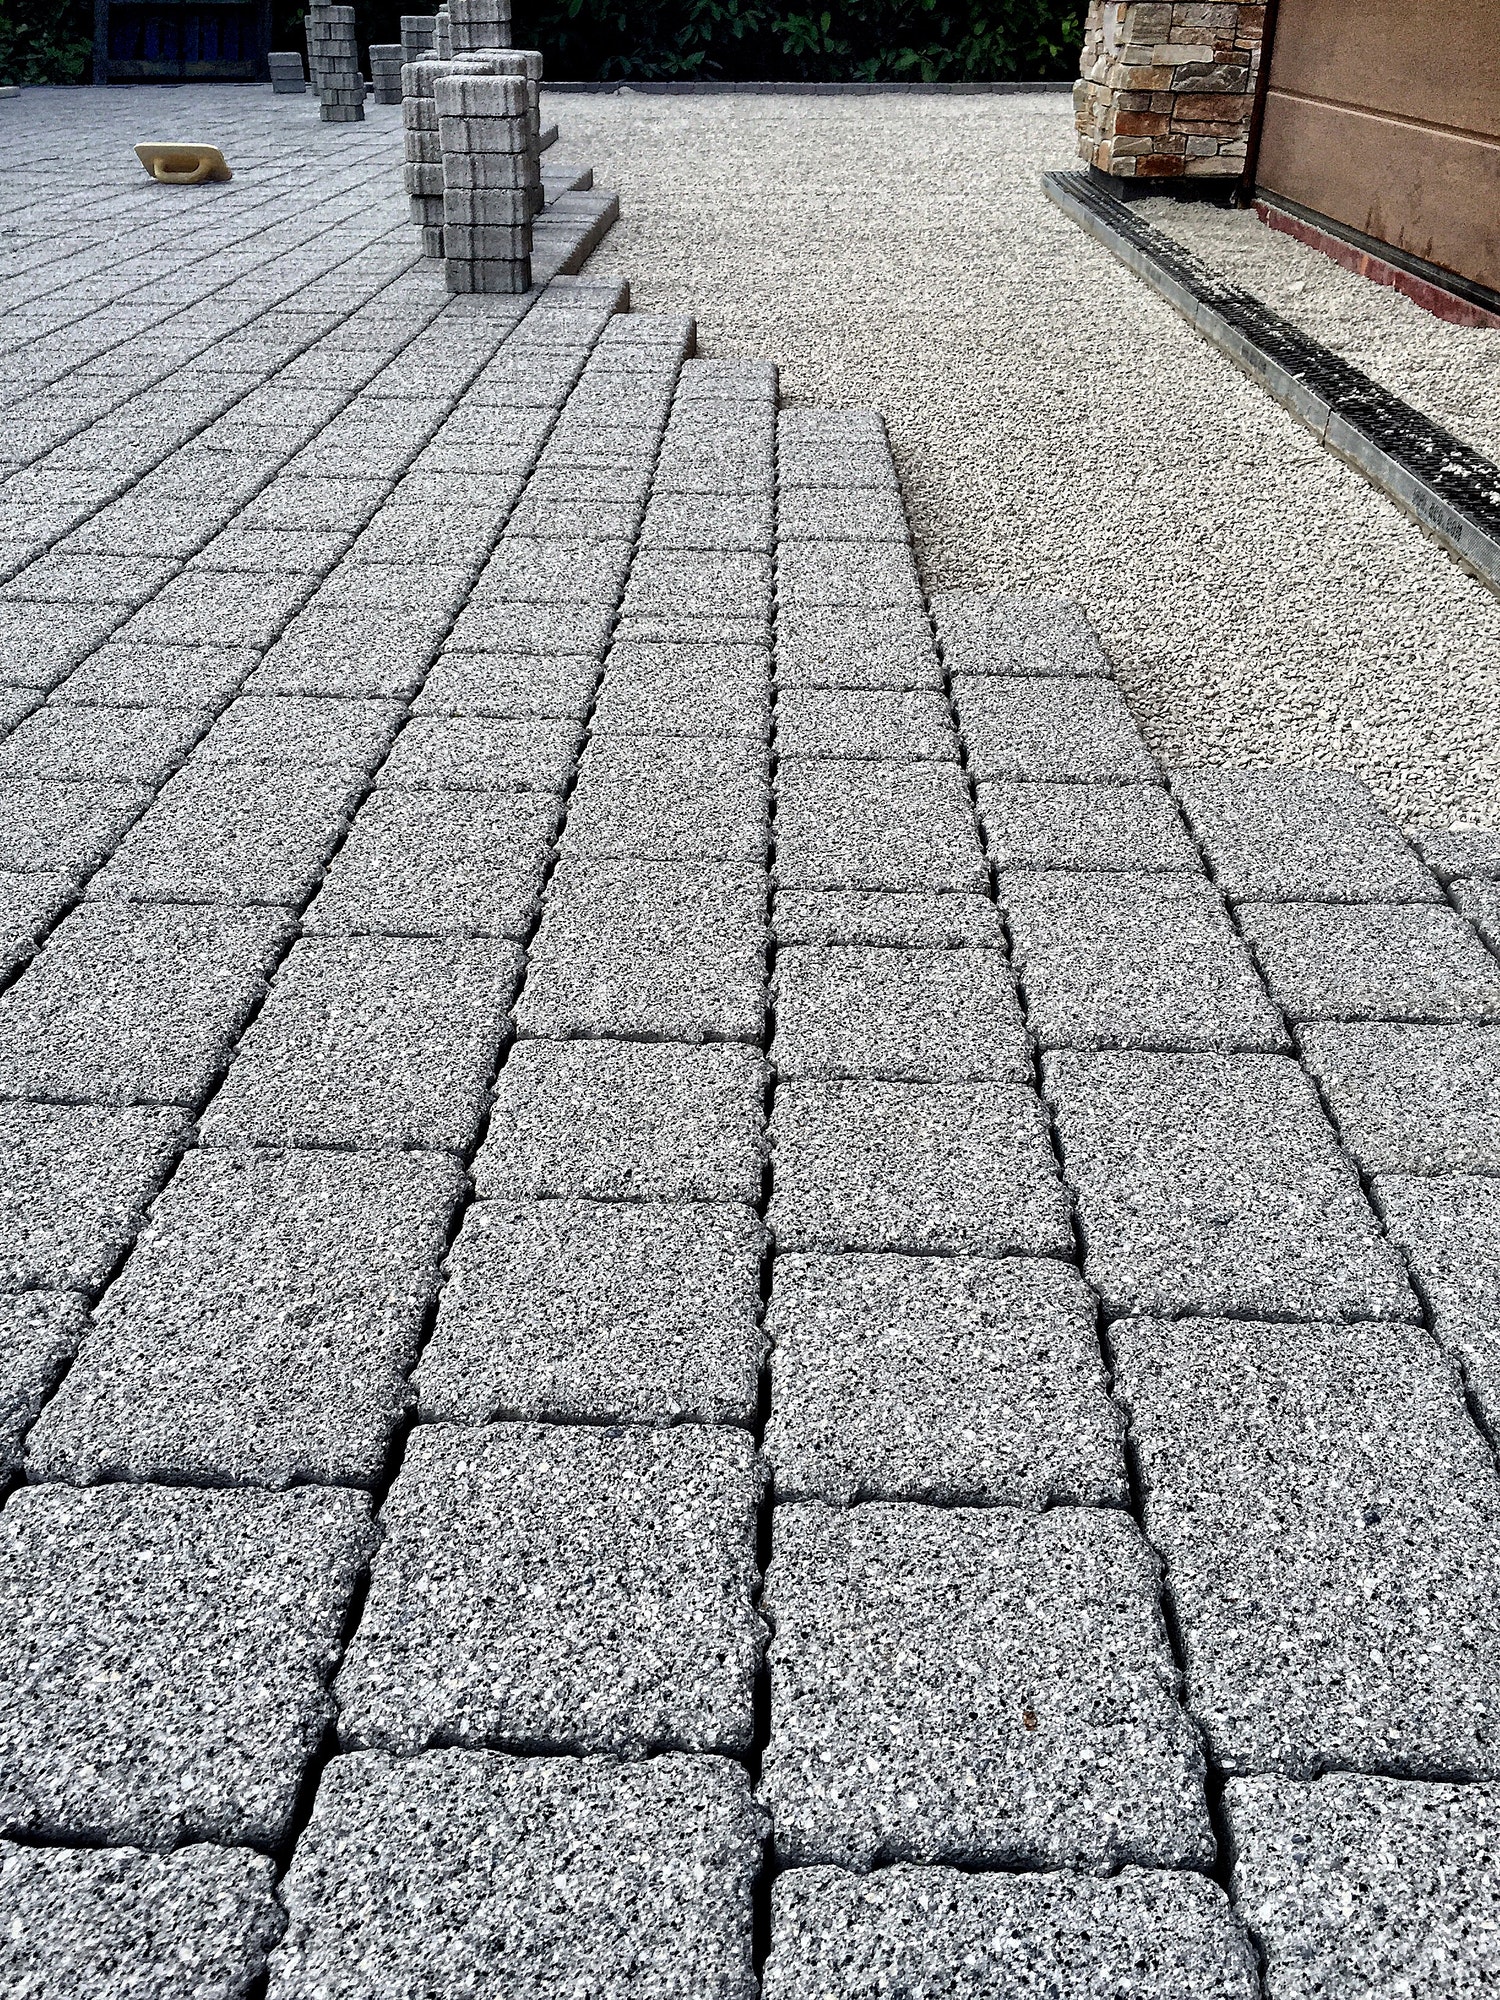 Paving blocks being laid on a driveway.